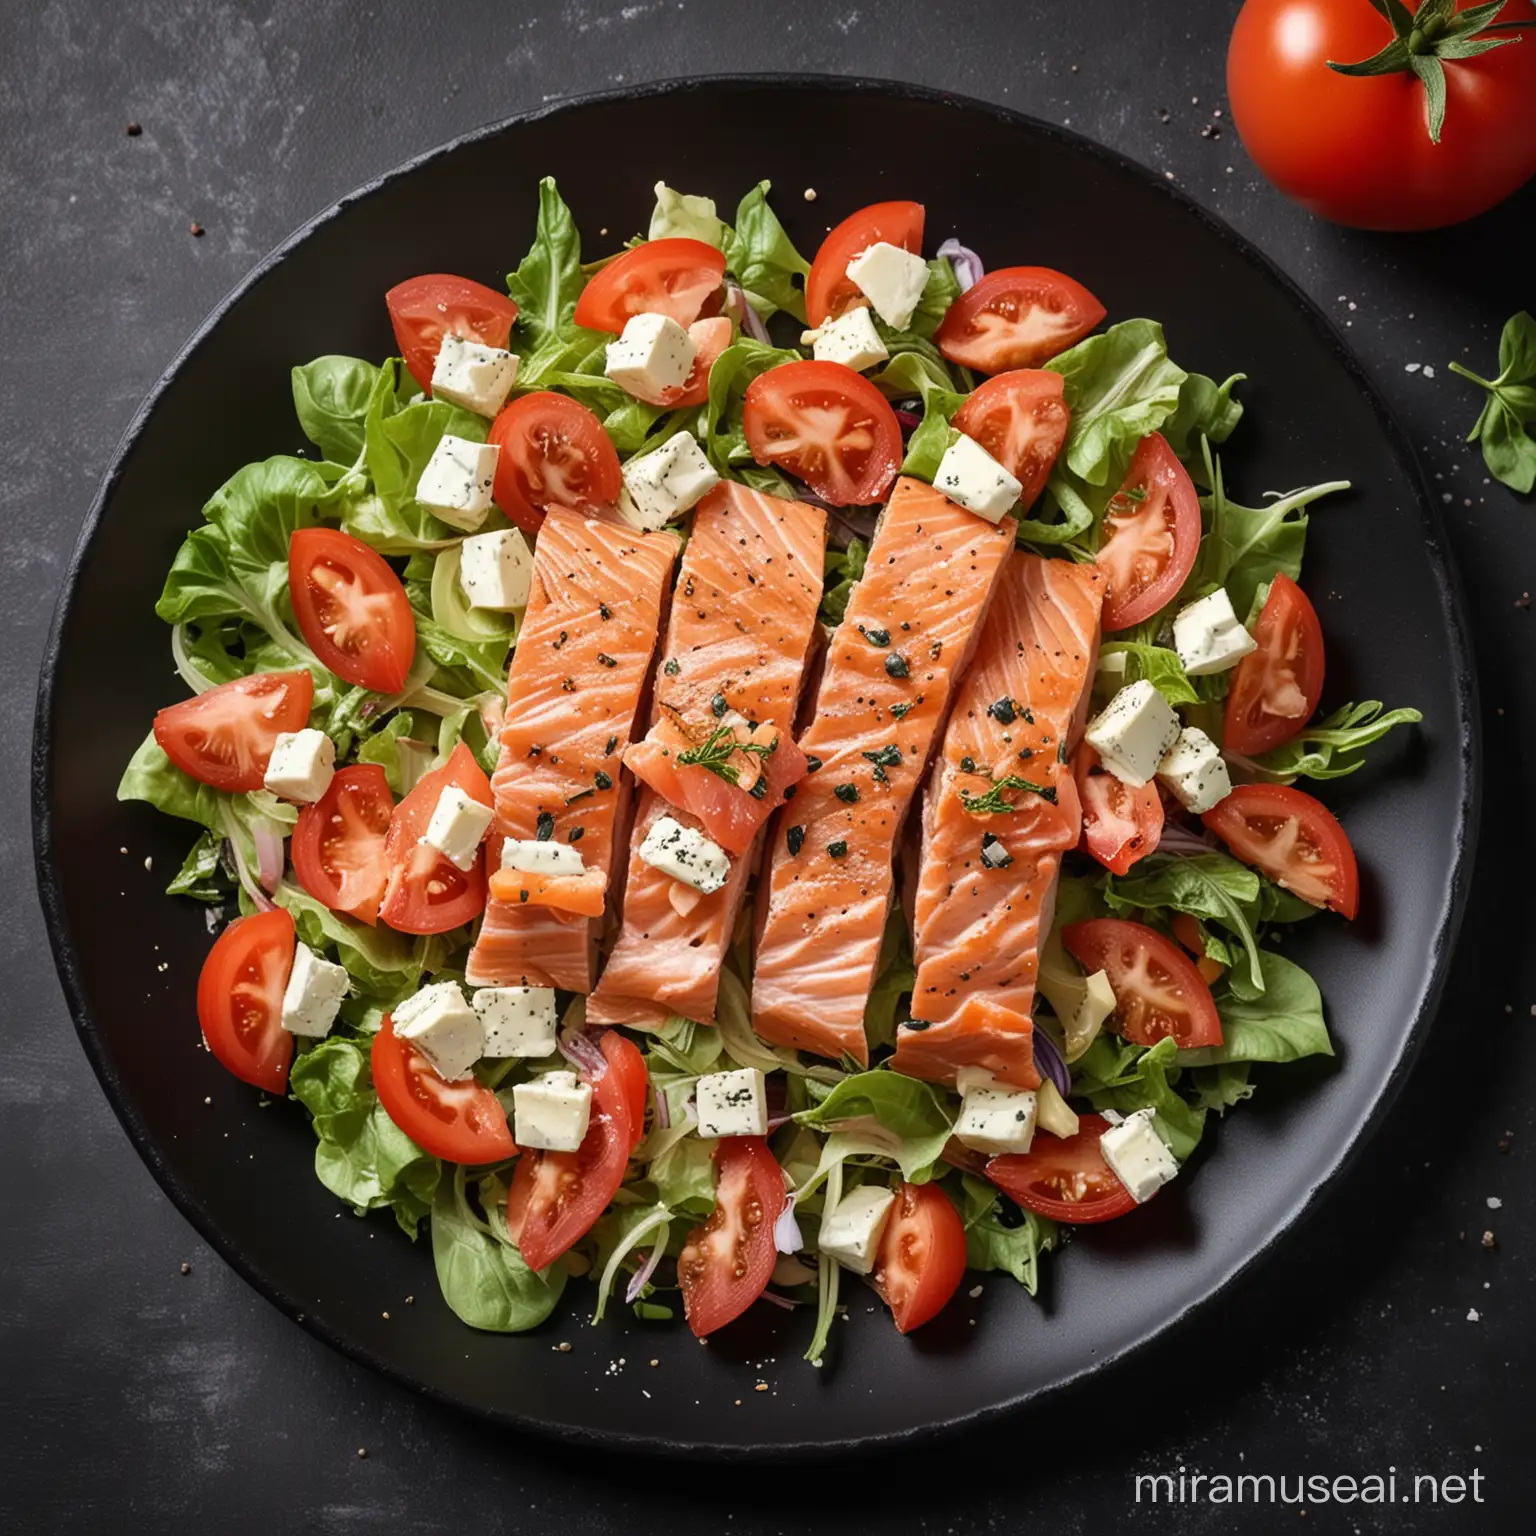 Fresh Salmon Salad with Tomato and Cheese on Round Black Plate